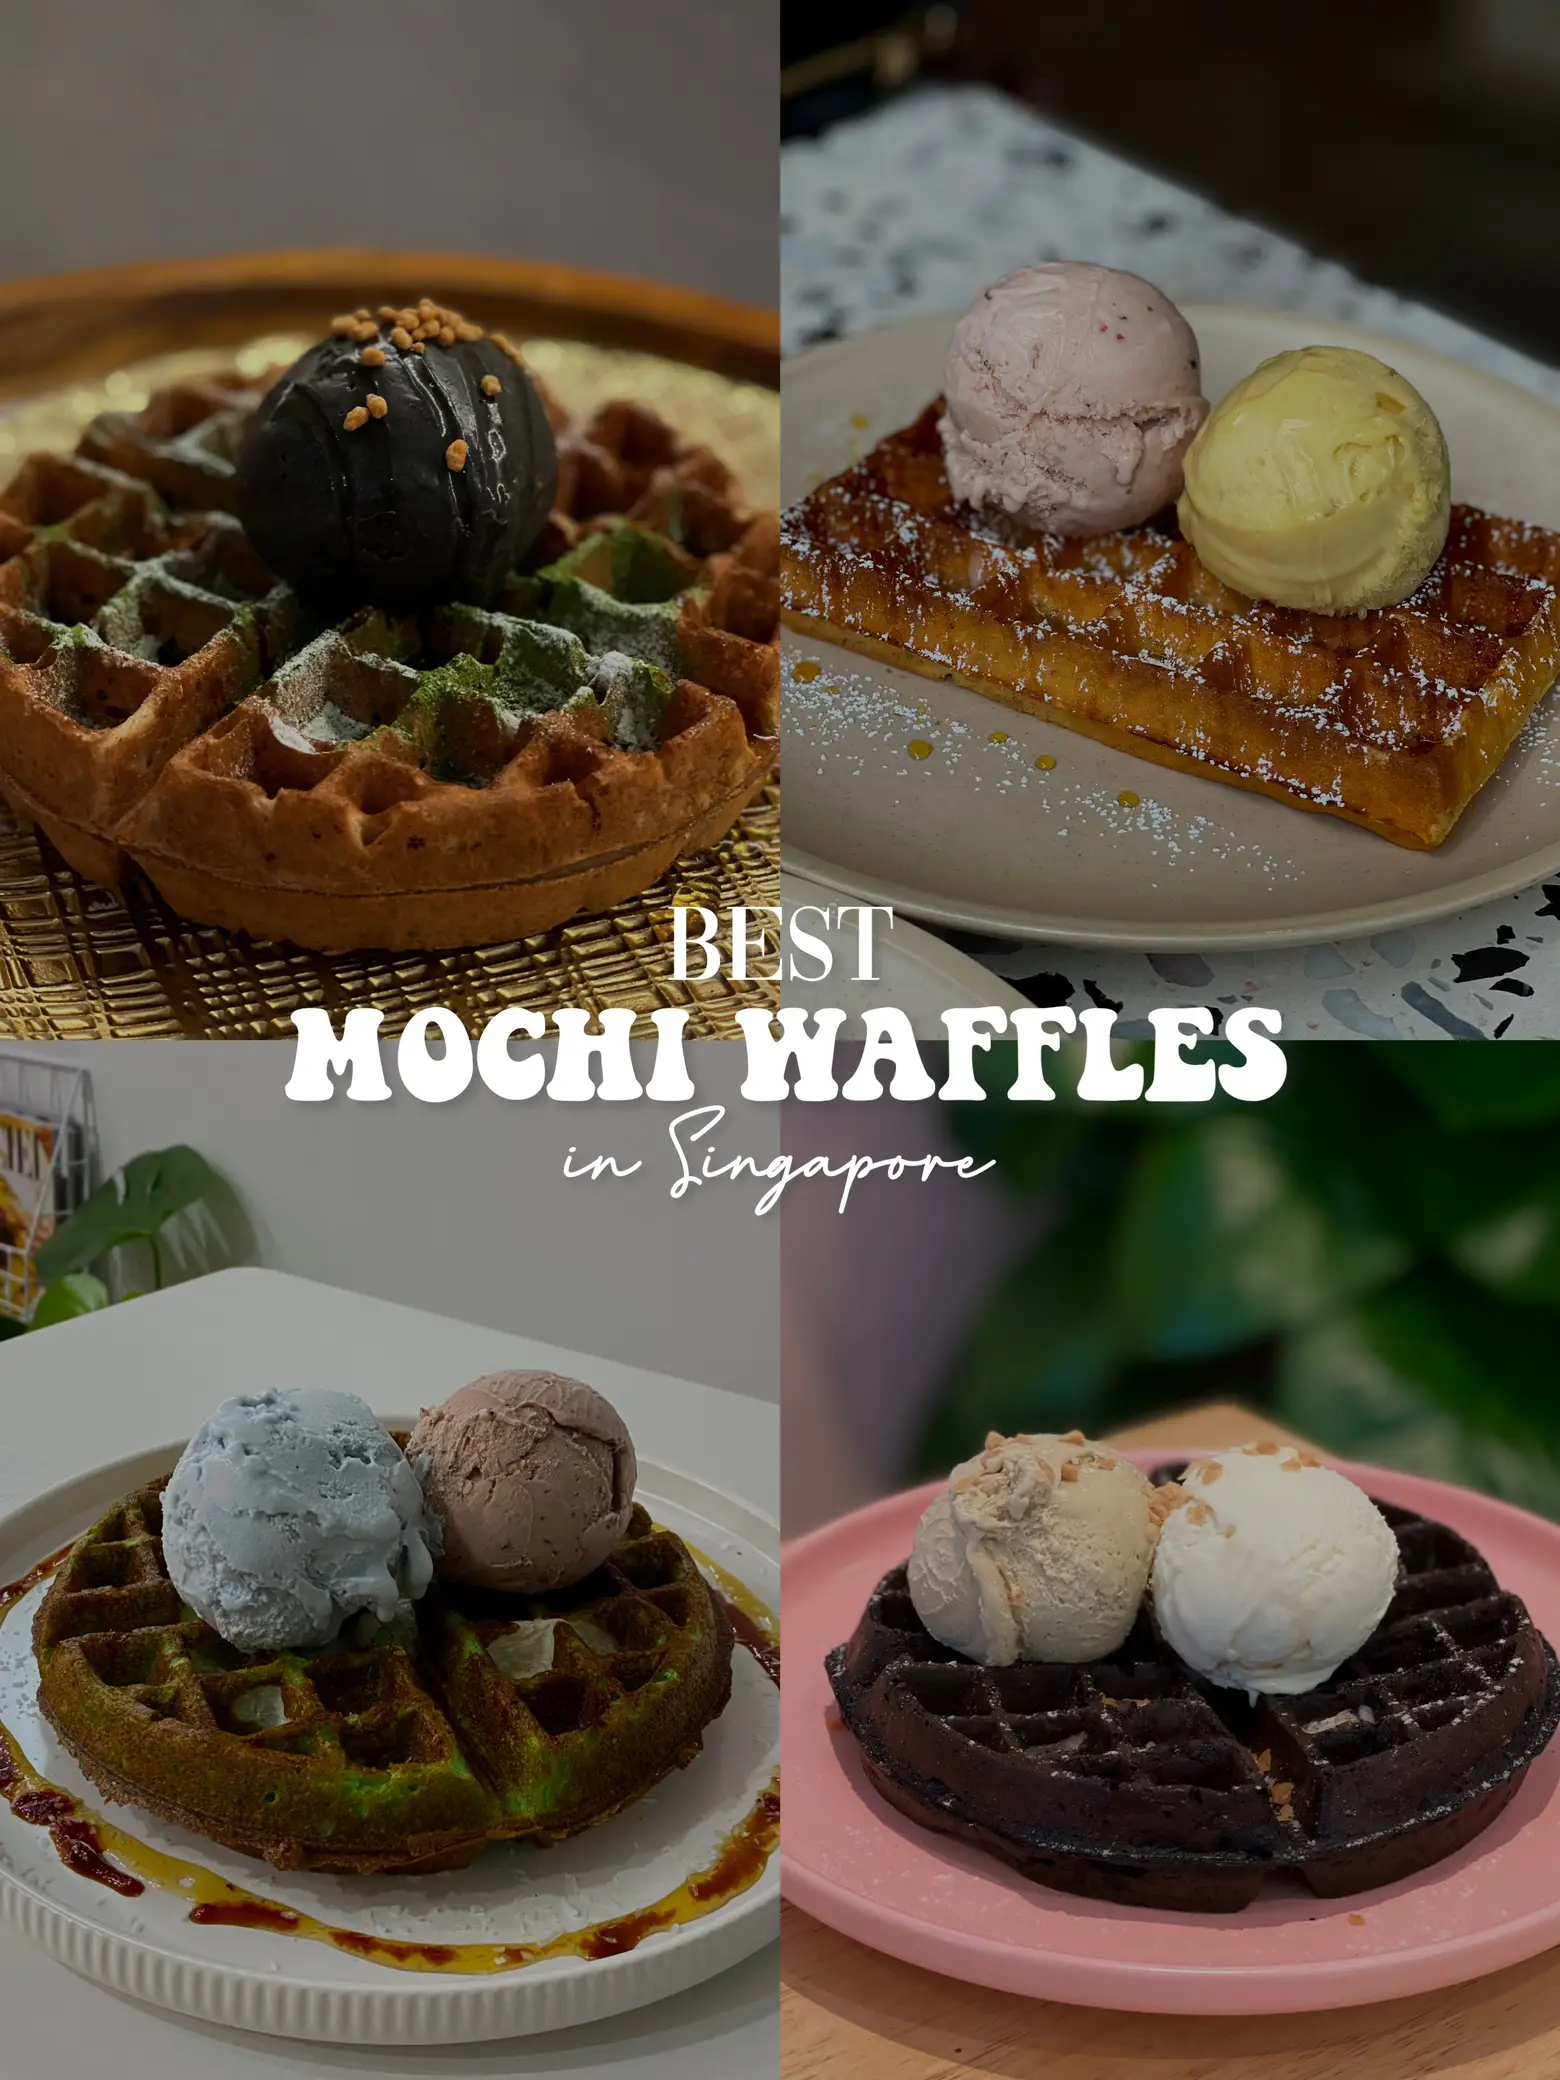 Where to find the best mochi waffles in sg!! 🧇's images(0)